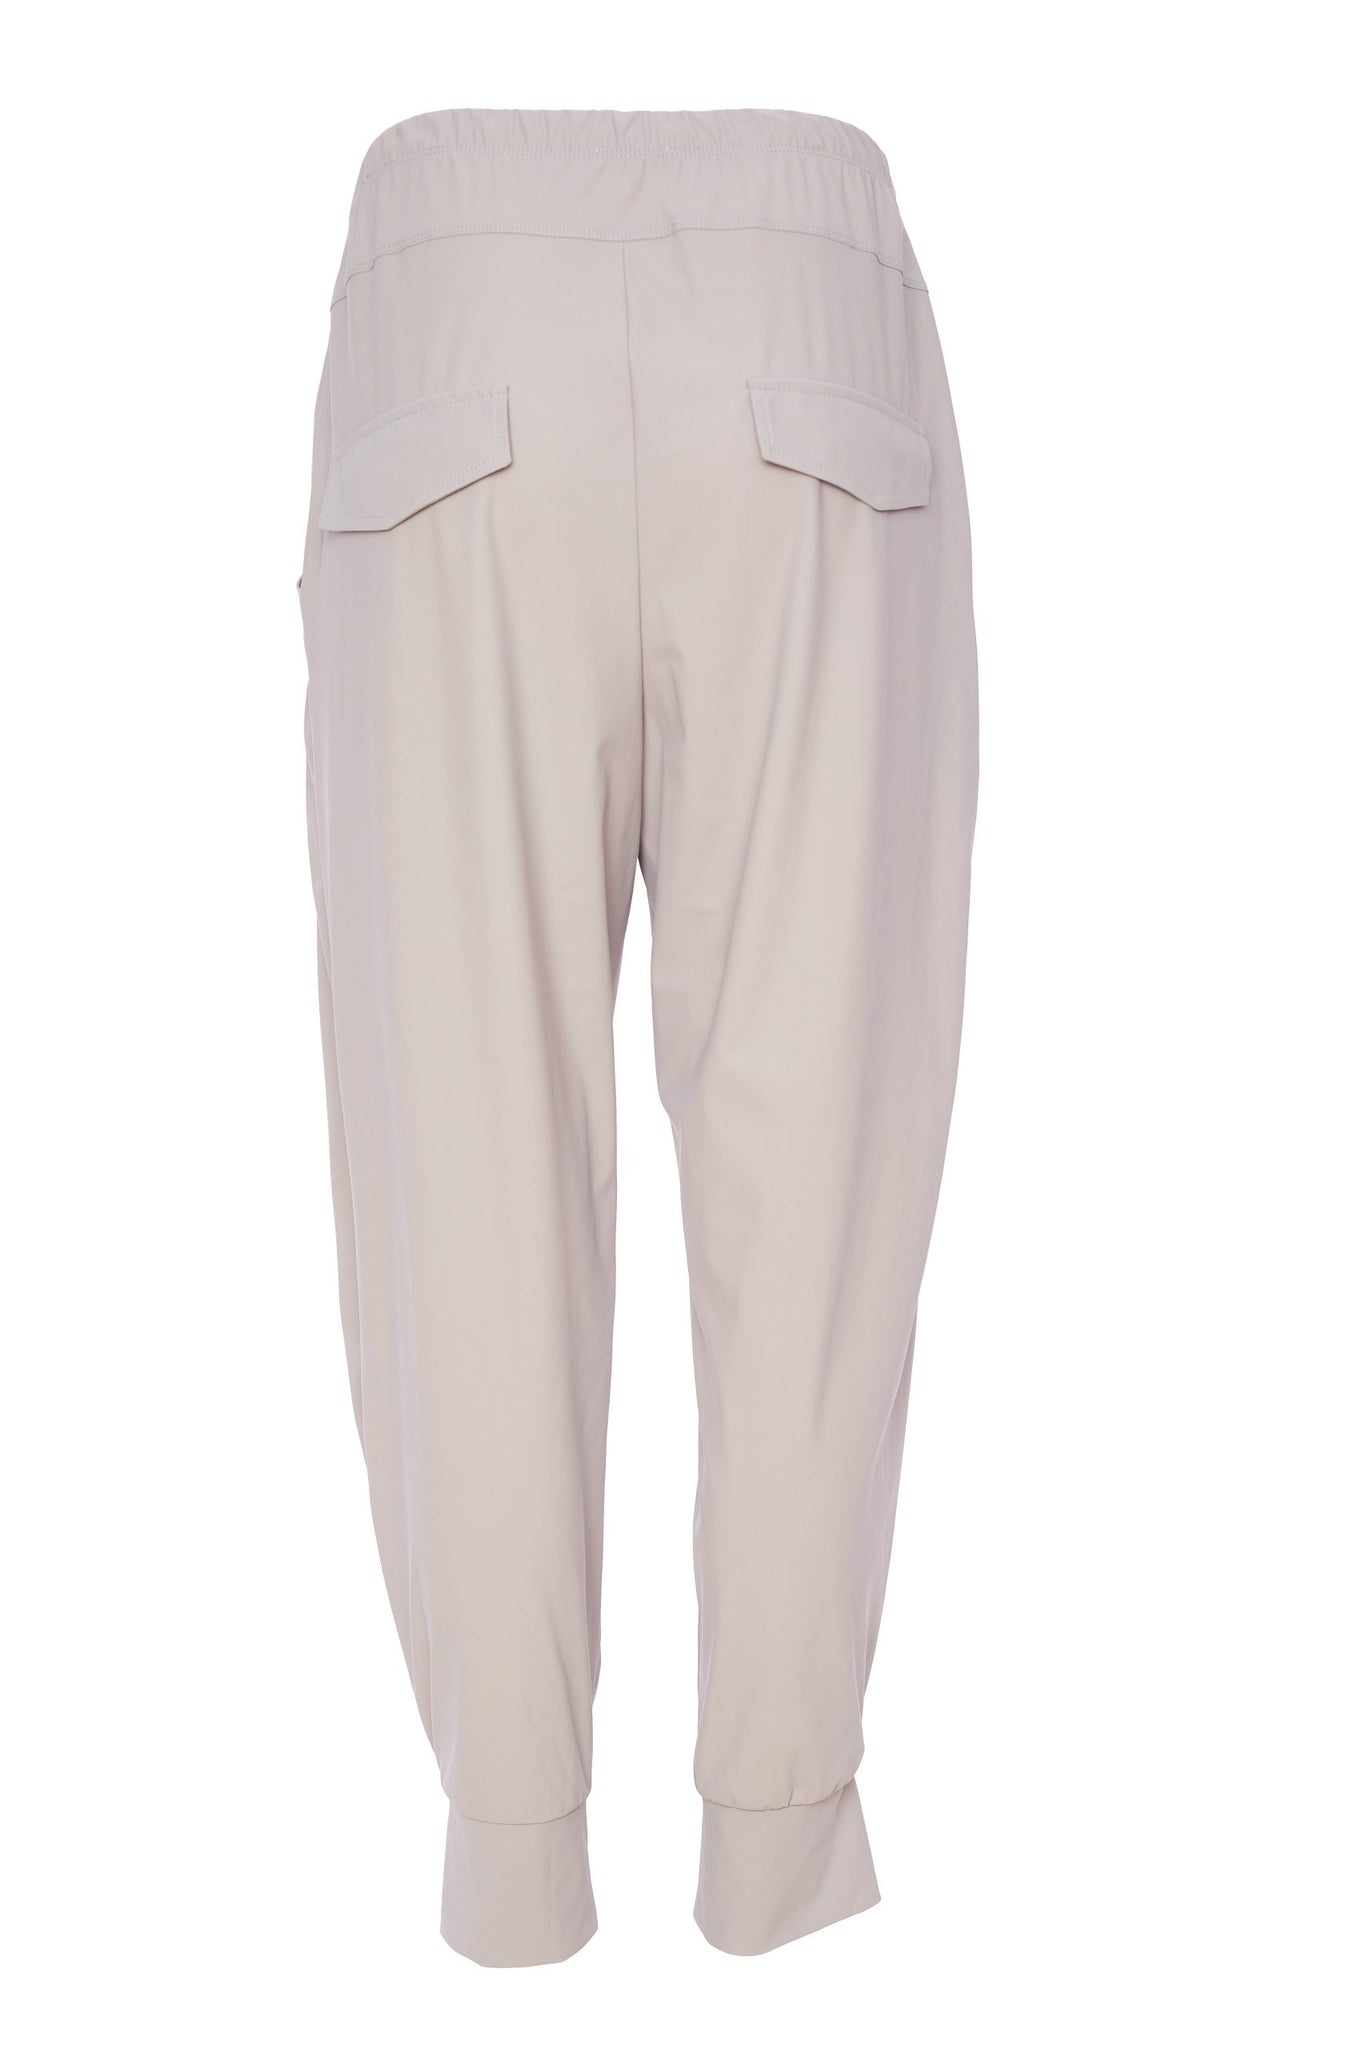 NAYA classic gathered pocket travel fabric cuff trousers in mink